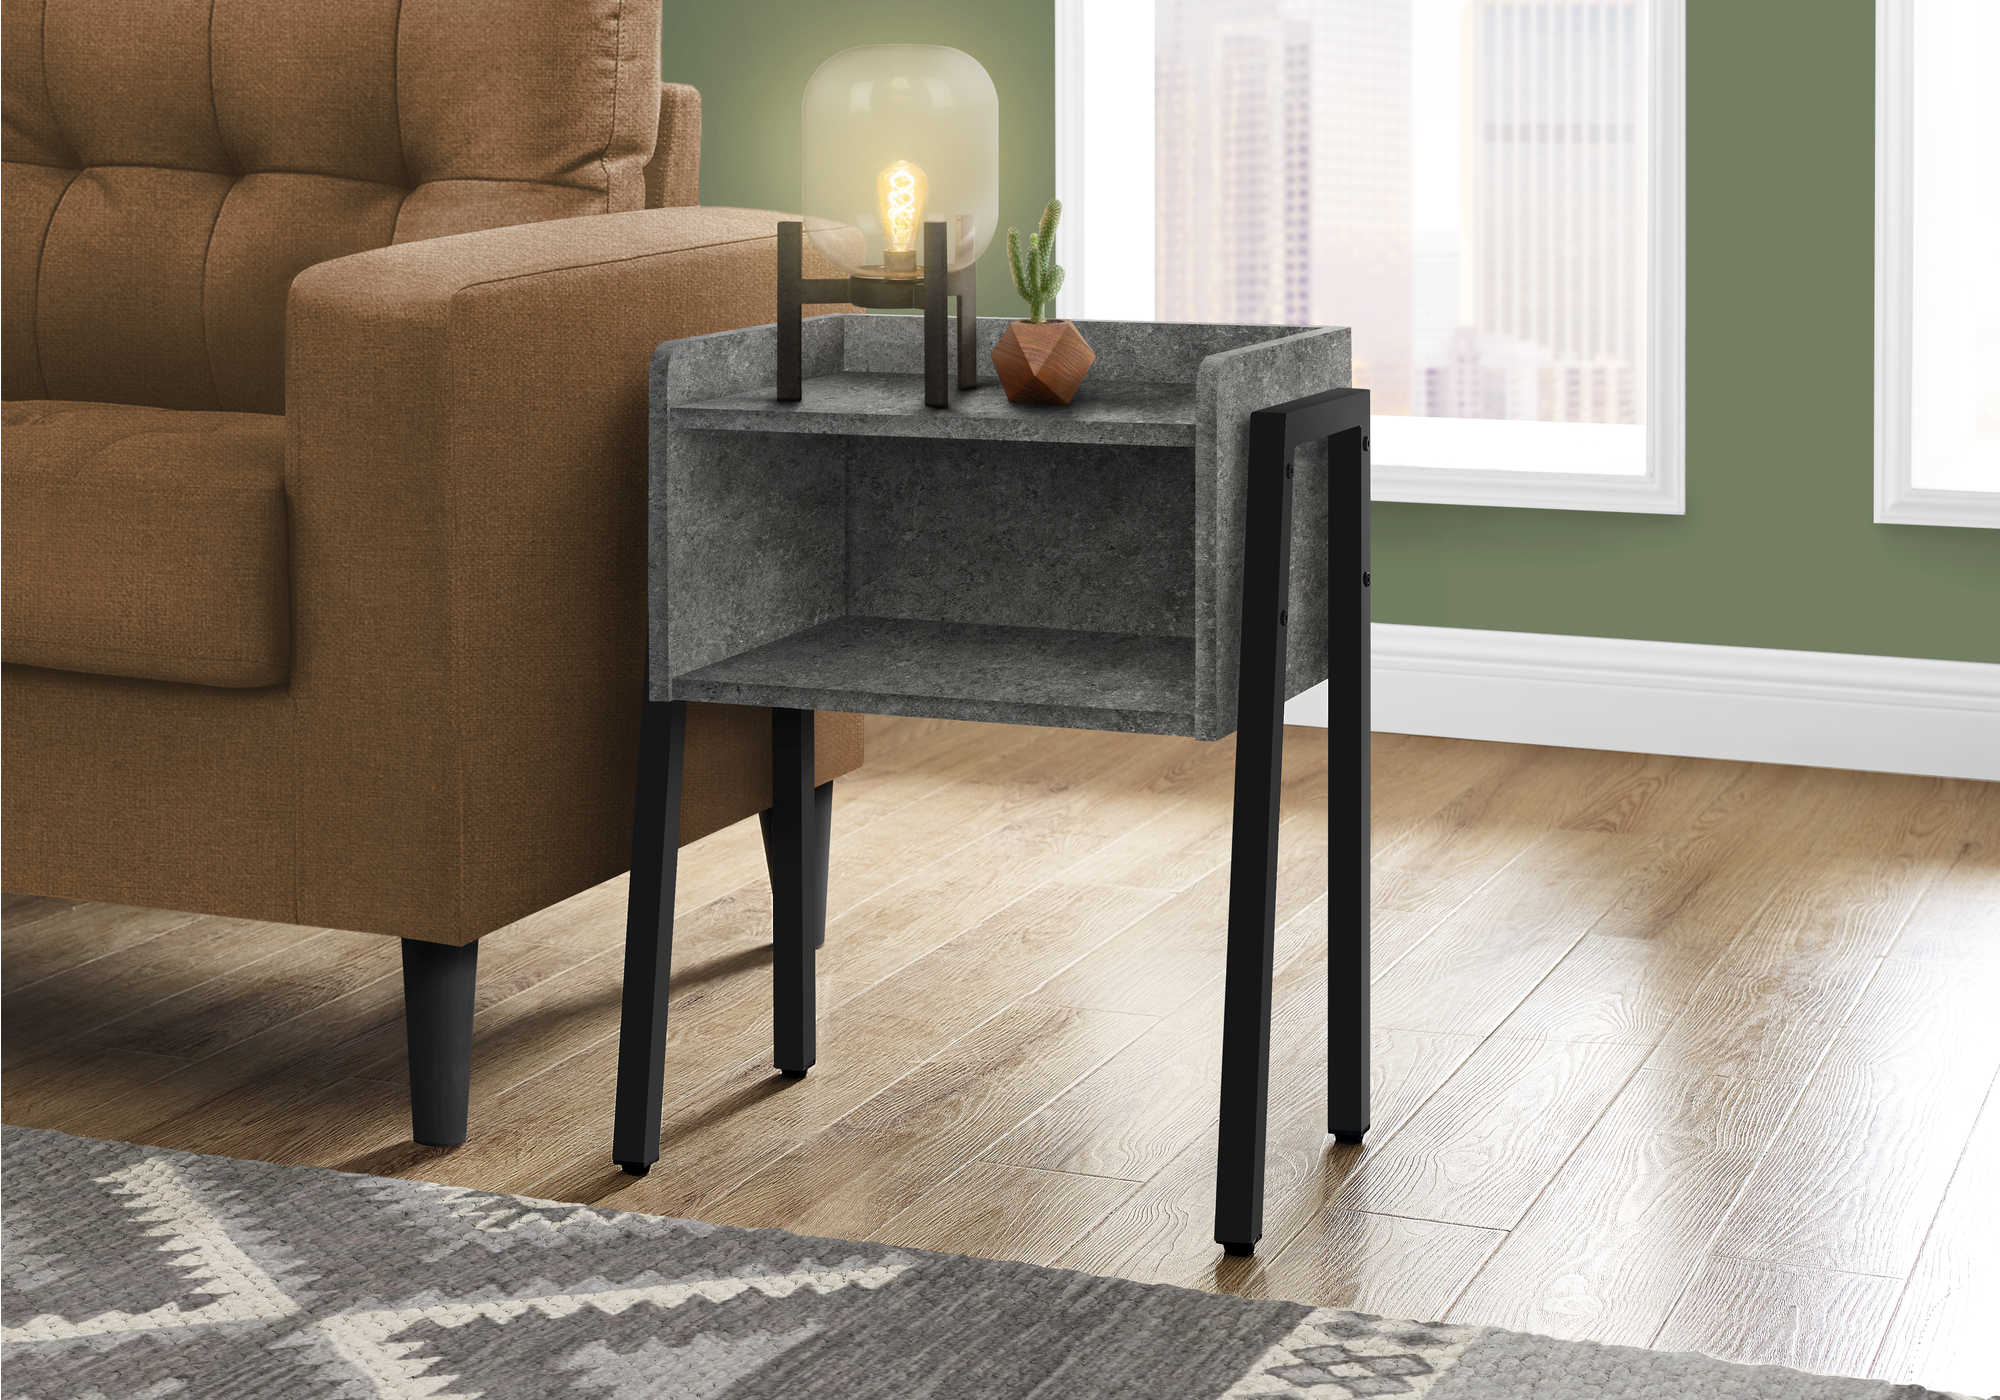 ACCENT TABLE - 23"H / GREY STONE-LOOK / BLACK METAL